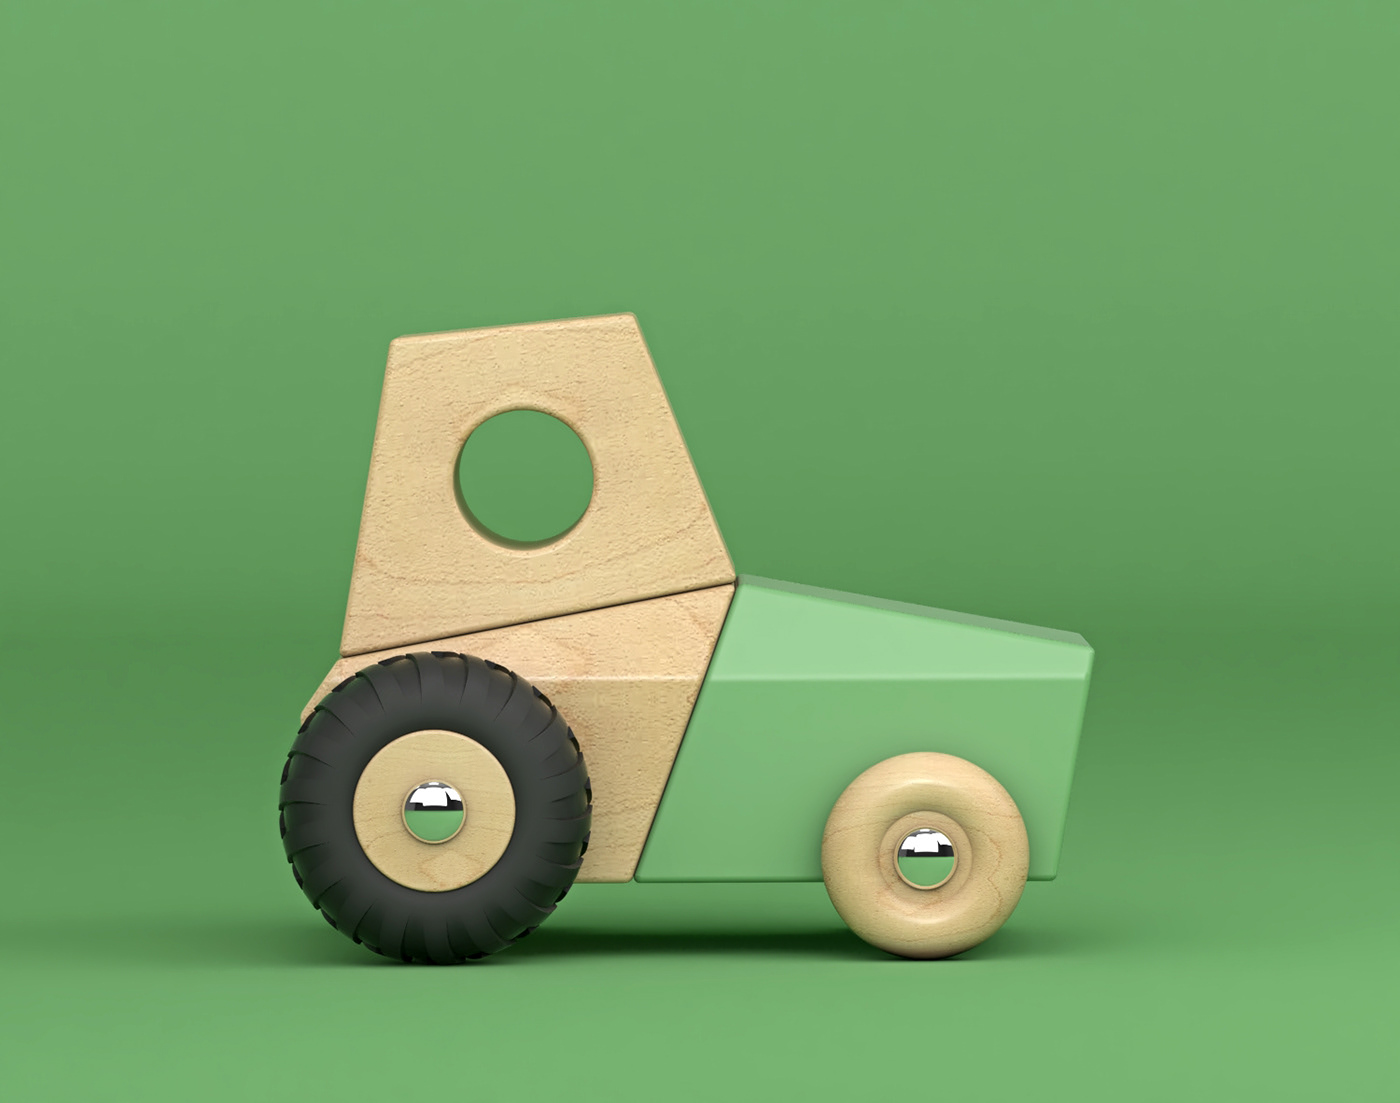 concept concept toy industrial design  product design  prototype toy toy design  wood wooden toy